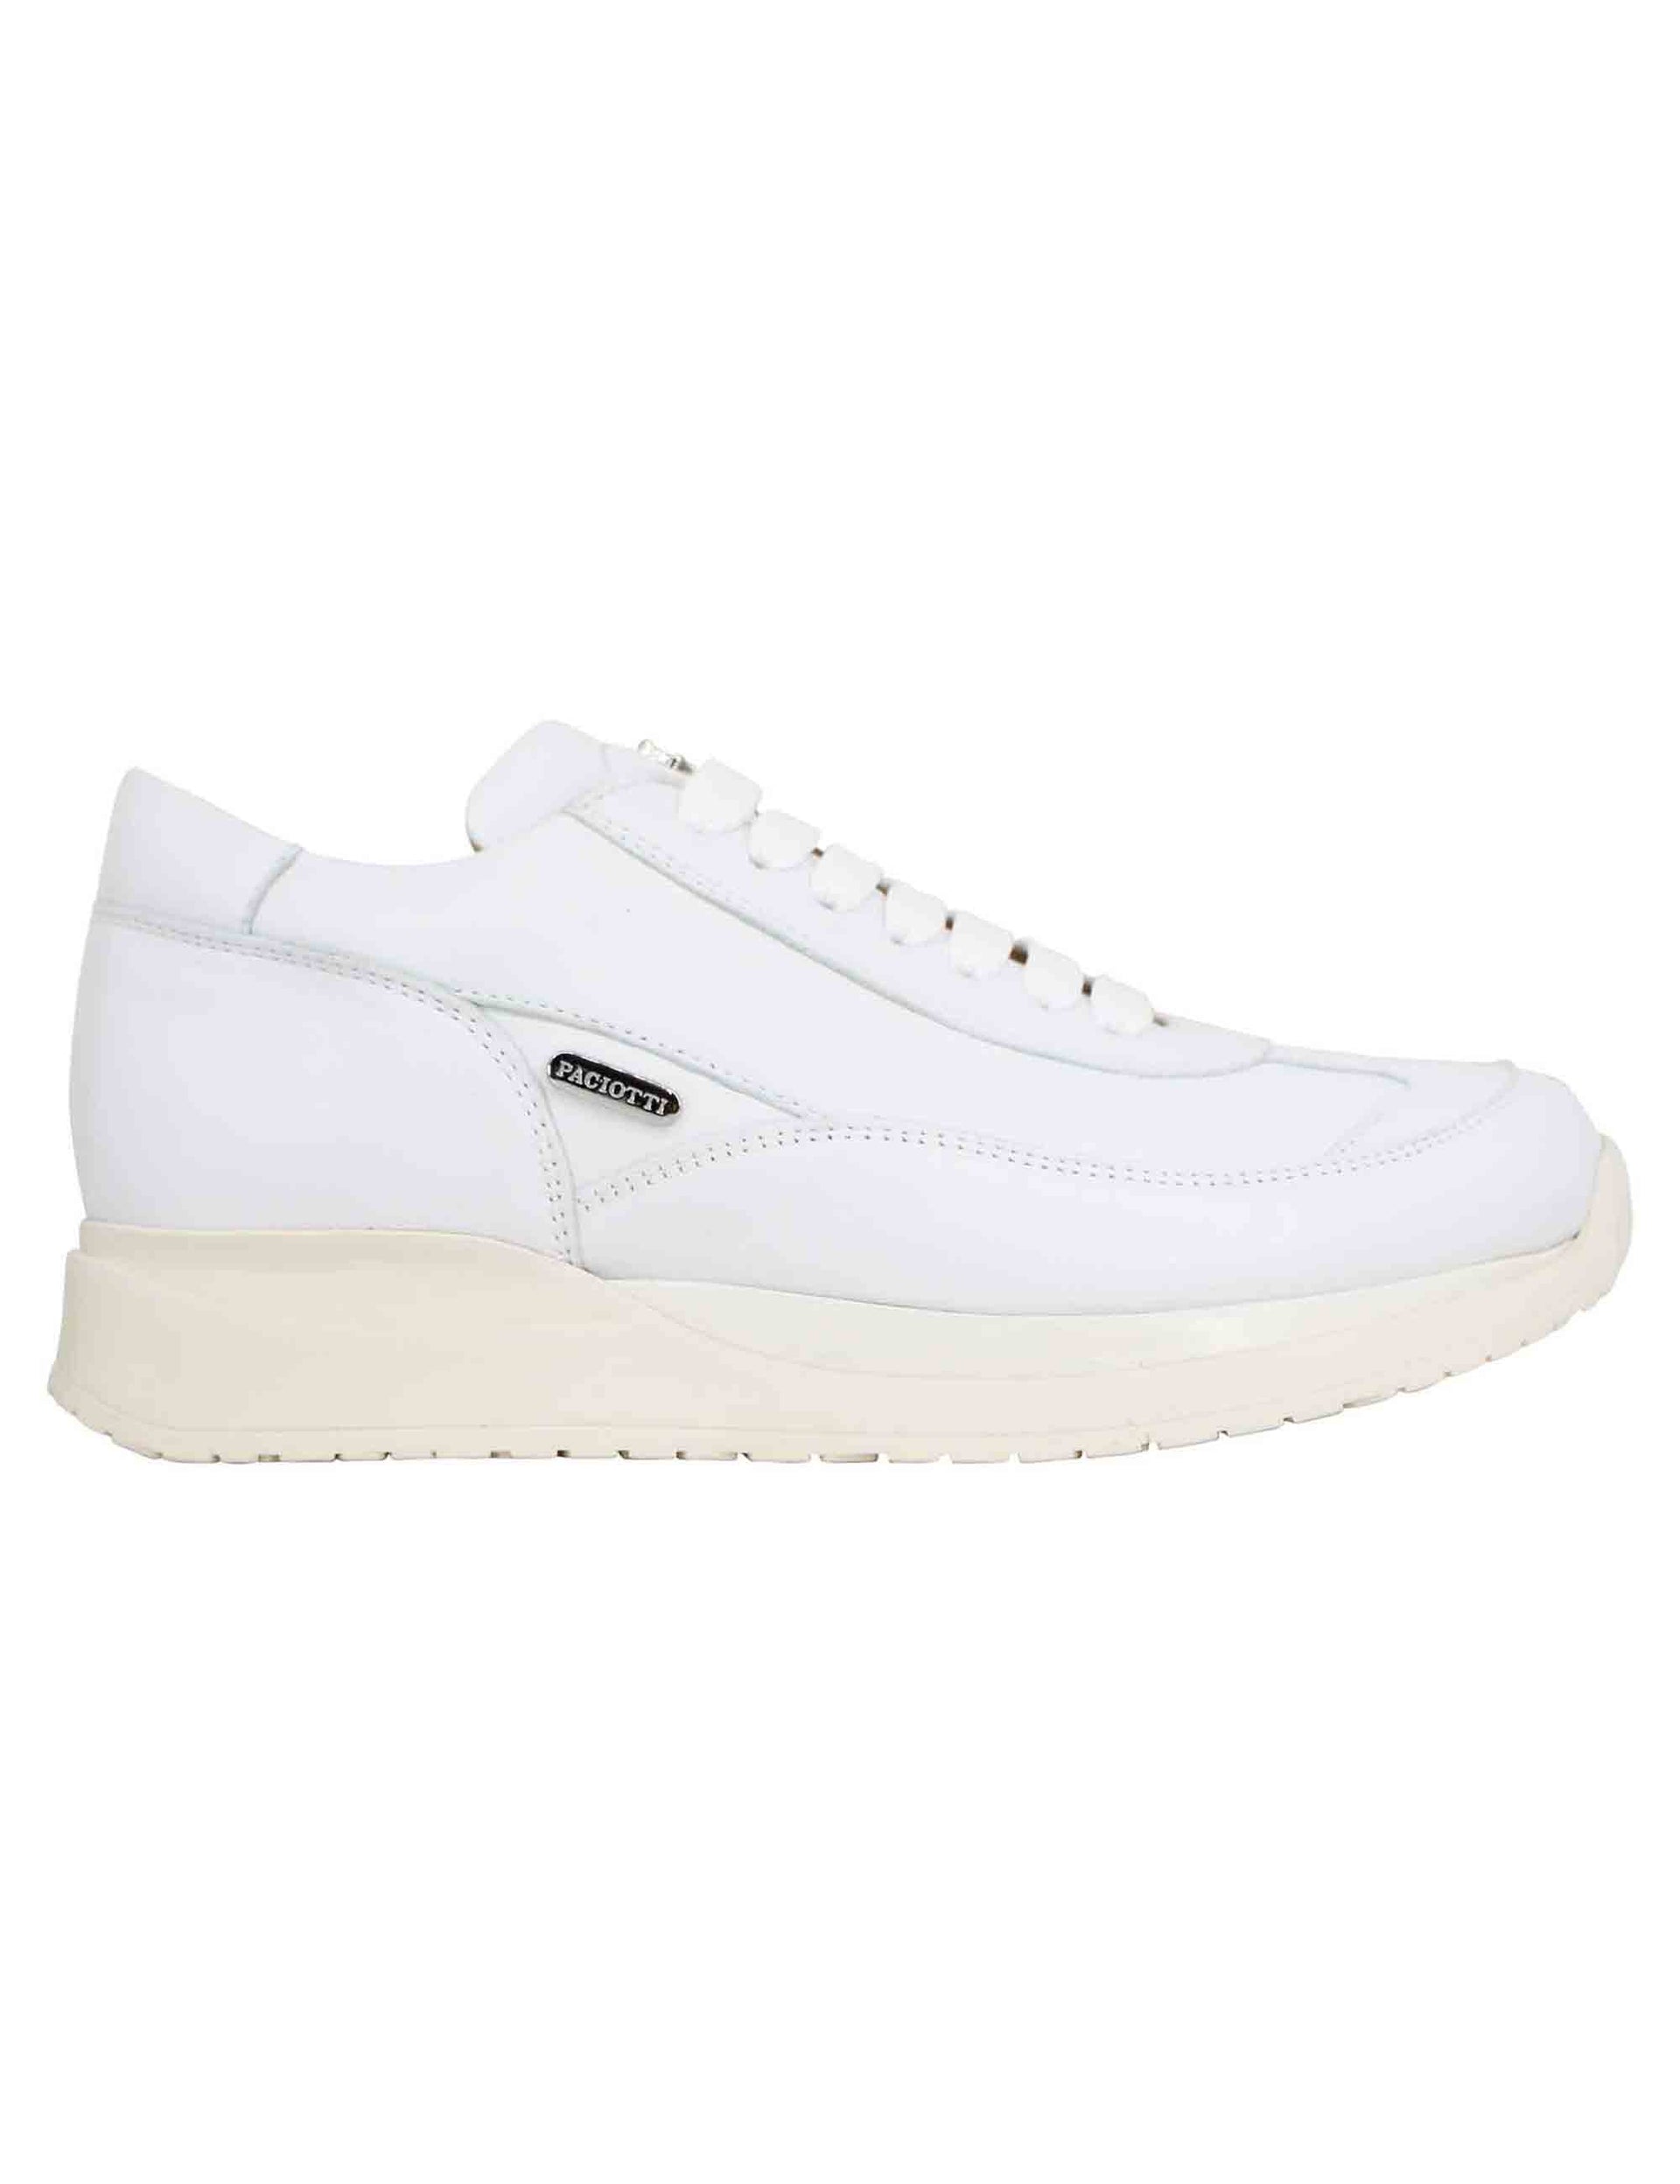 Women's sneakers in white laminated leather